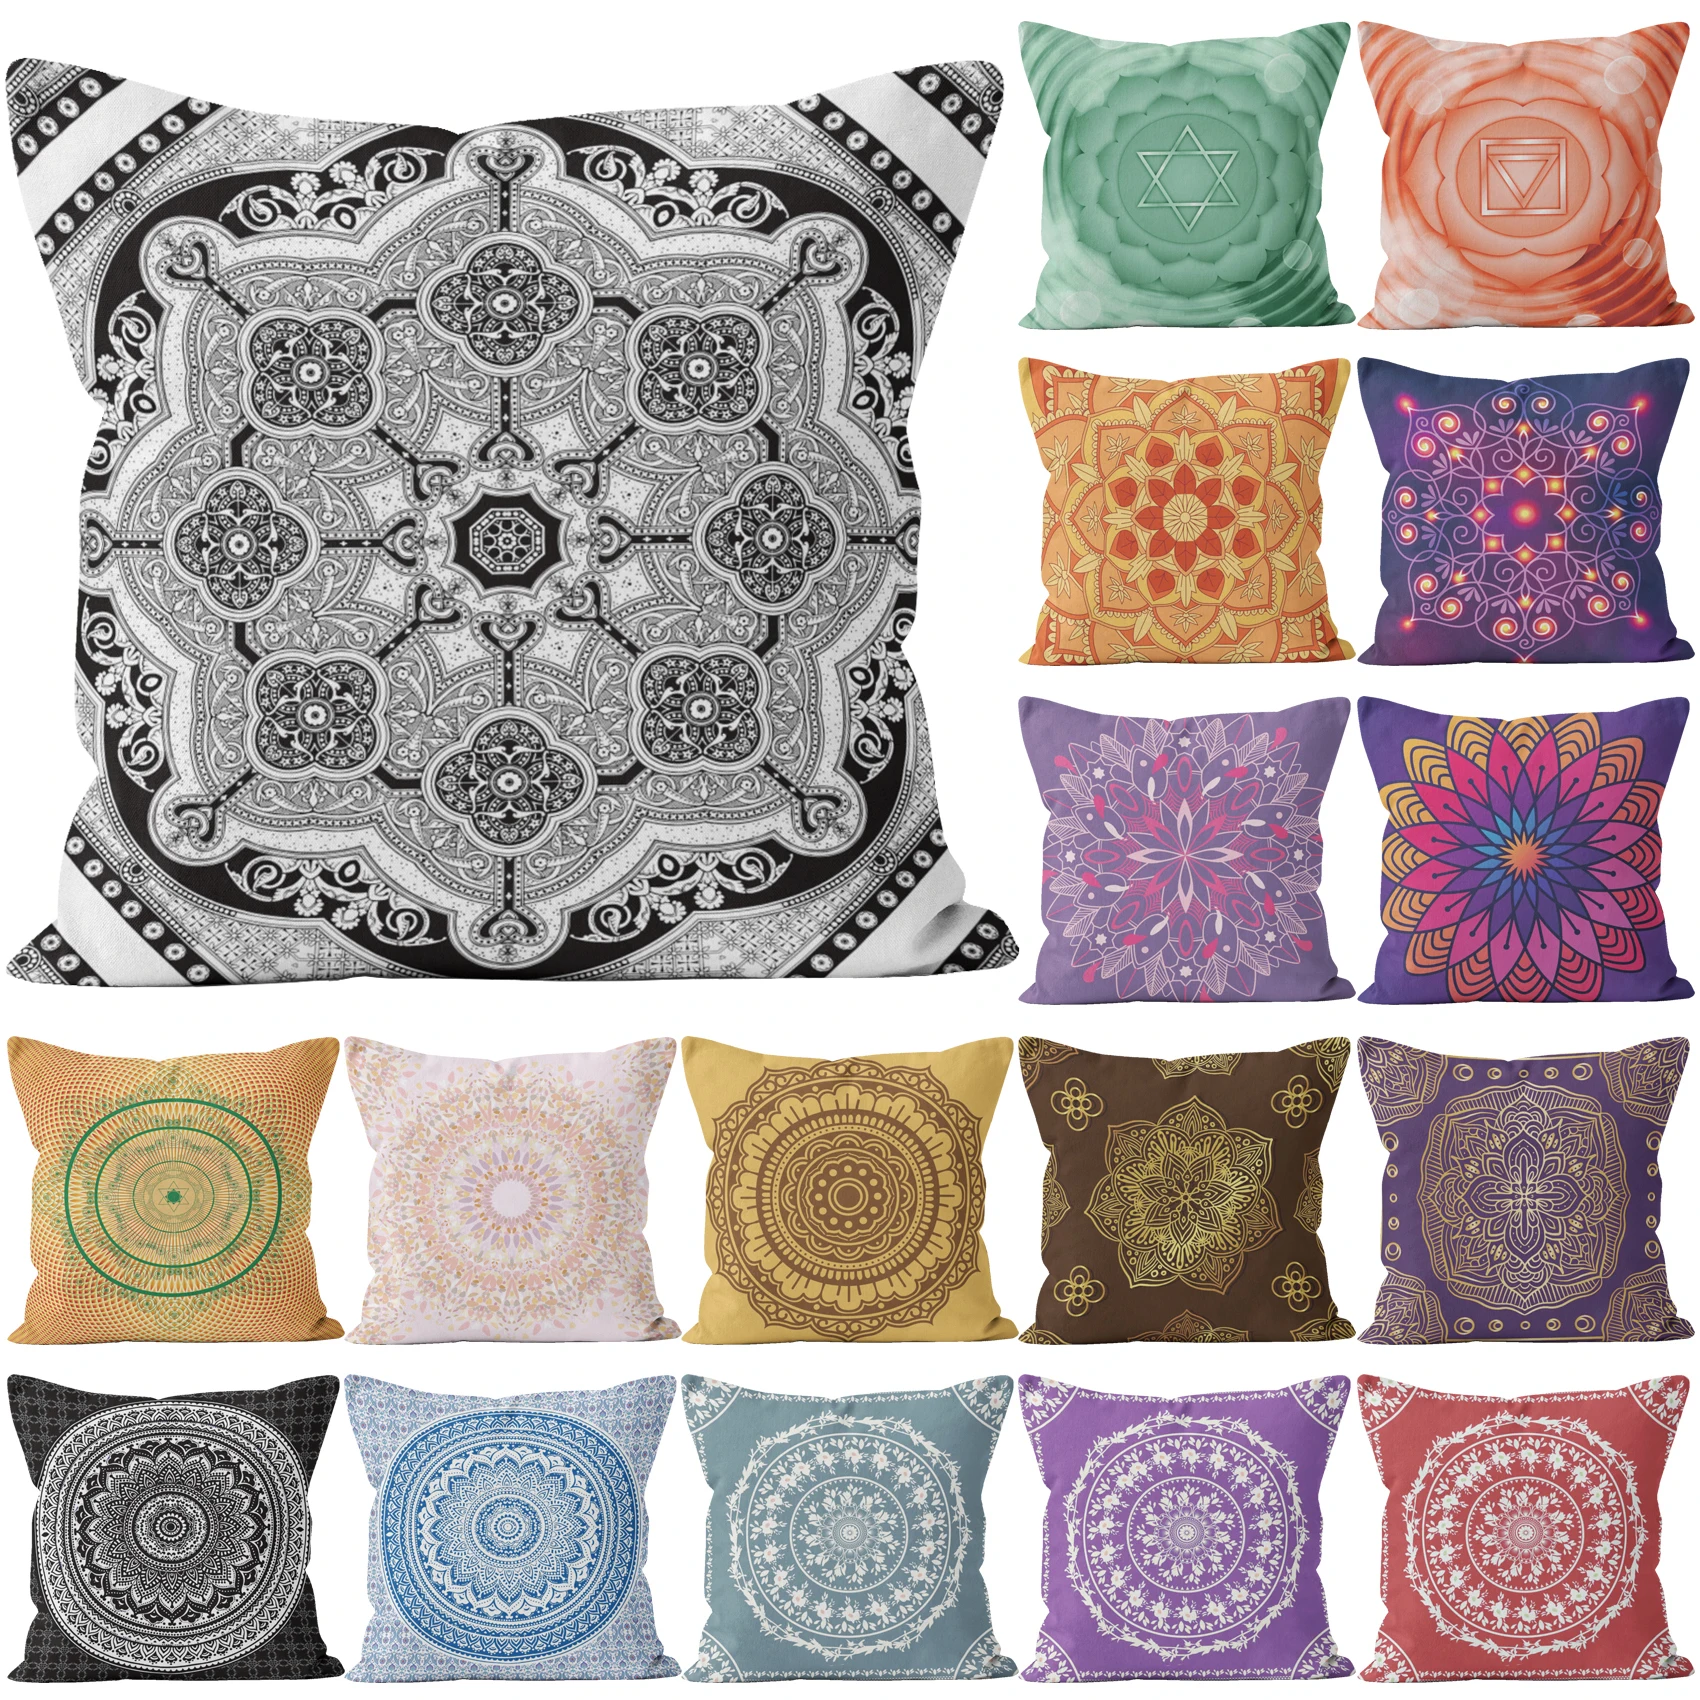 

Mandala Linen Cushion Cover Indian Meditation Witchcraft Psychedelic Hippie Living Room Sofa Cushion Cover Home Decor Wholesale